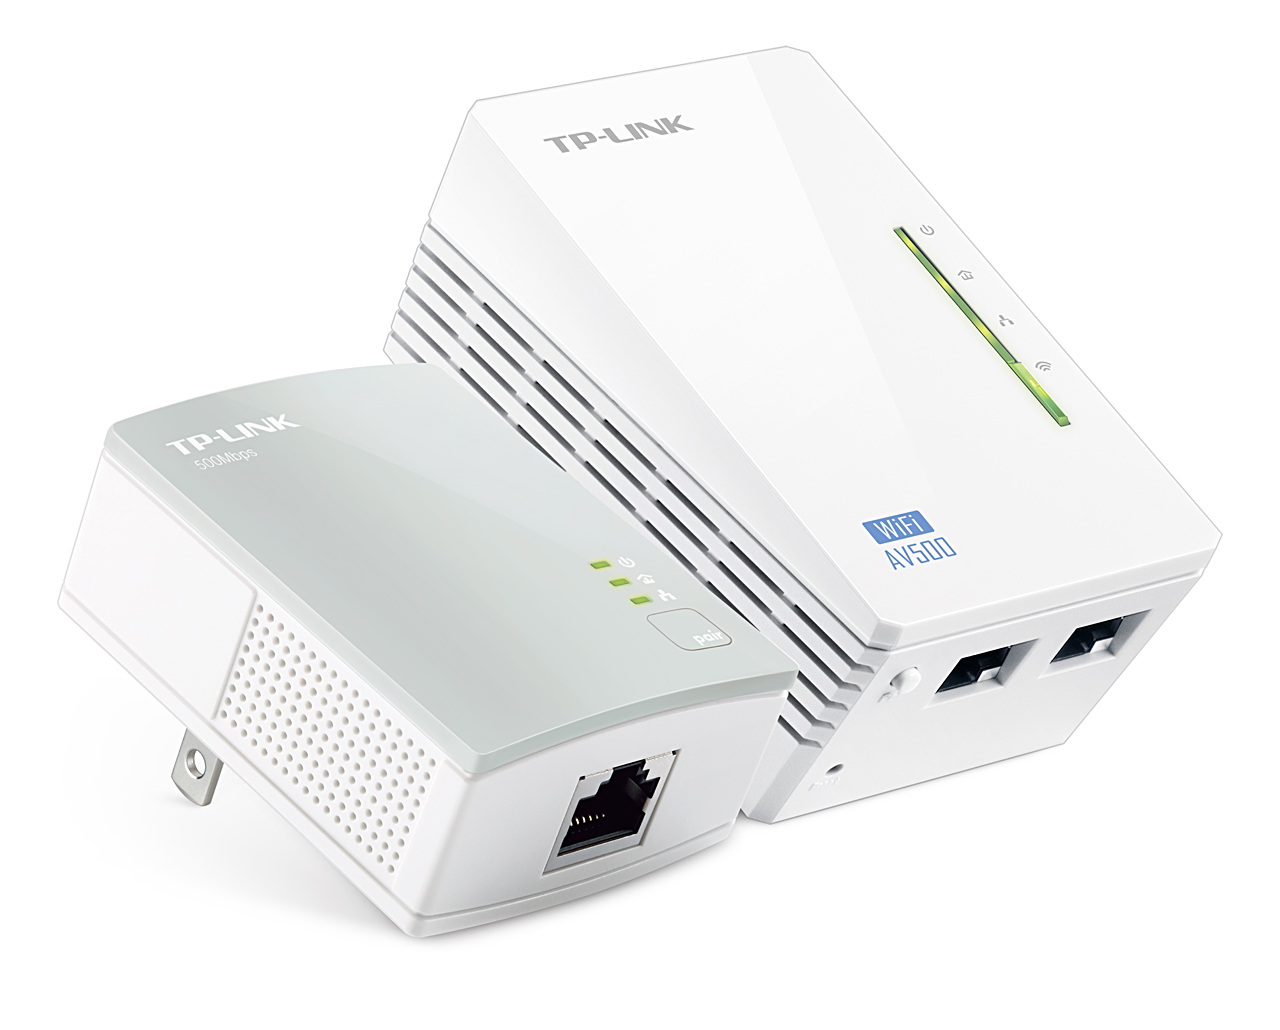 Mangle Male mm TP-Link TL-WPA4220KIT Powerline Wireless Extender Review | The ChannelPro  Network